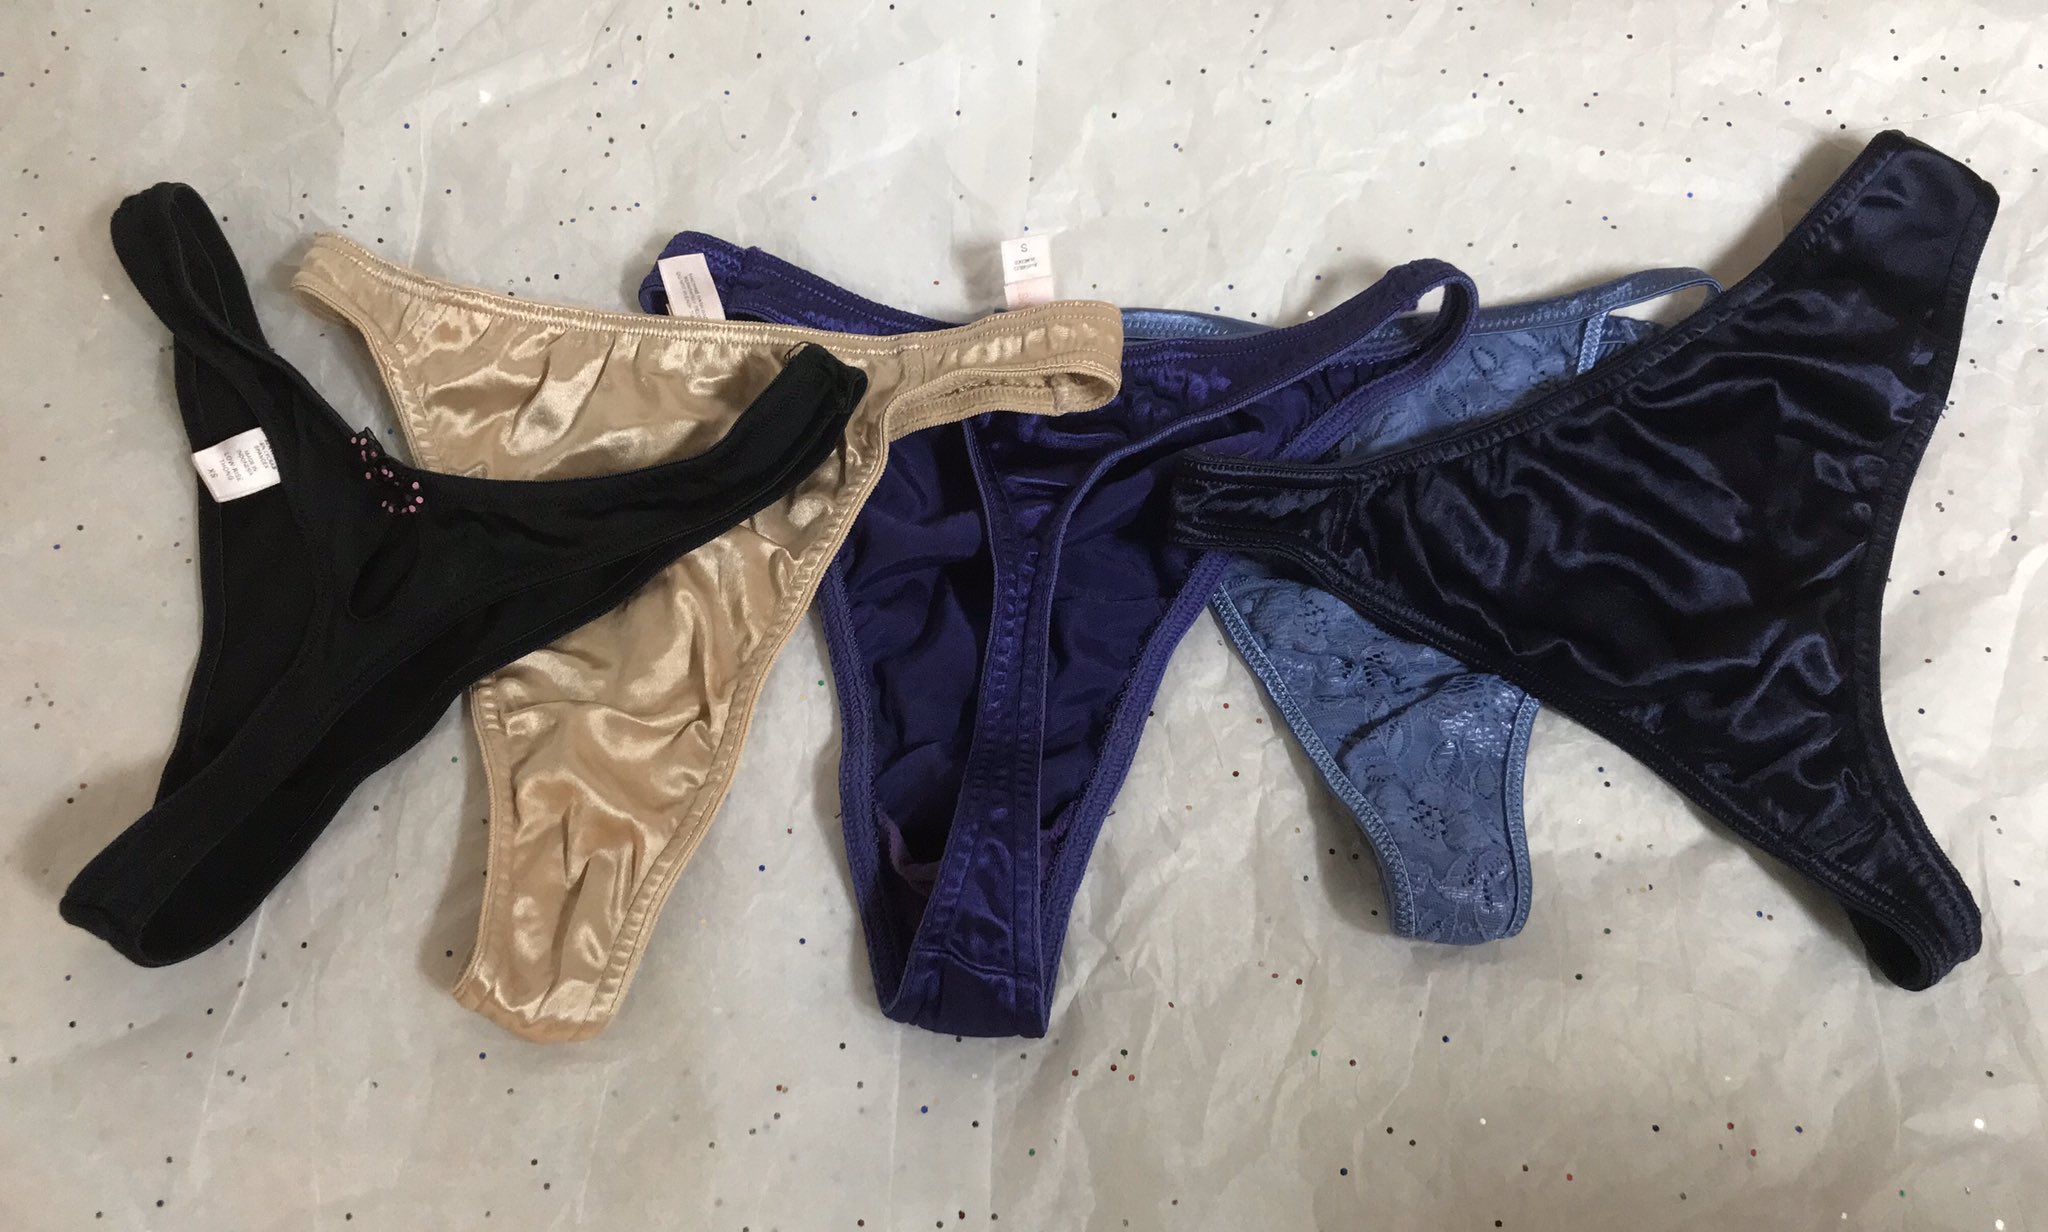 Erica's Used Panties👙🍊🍒🍭 on X: Silk and satin panties for you  #pantysniffers Cum on you know you want them to sniff🍑 send a request to  buy these worn panties. #pantyseller #wornpanties #buymypanties #